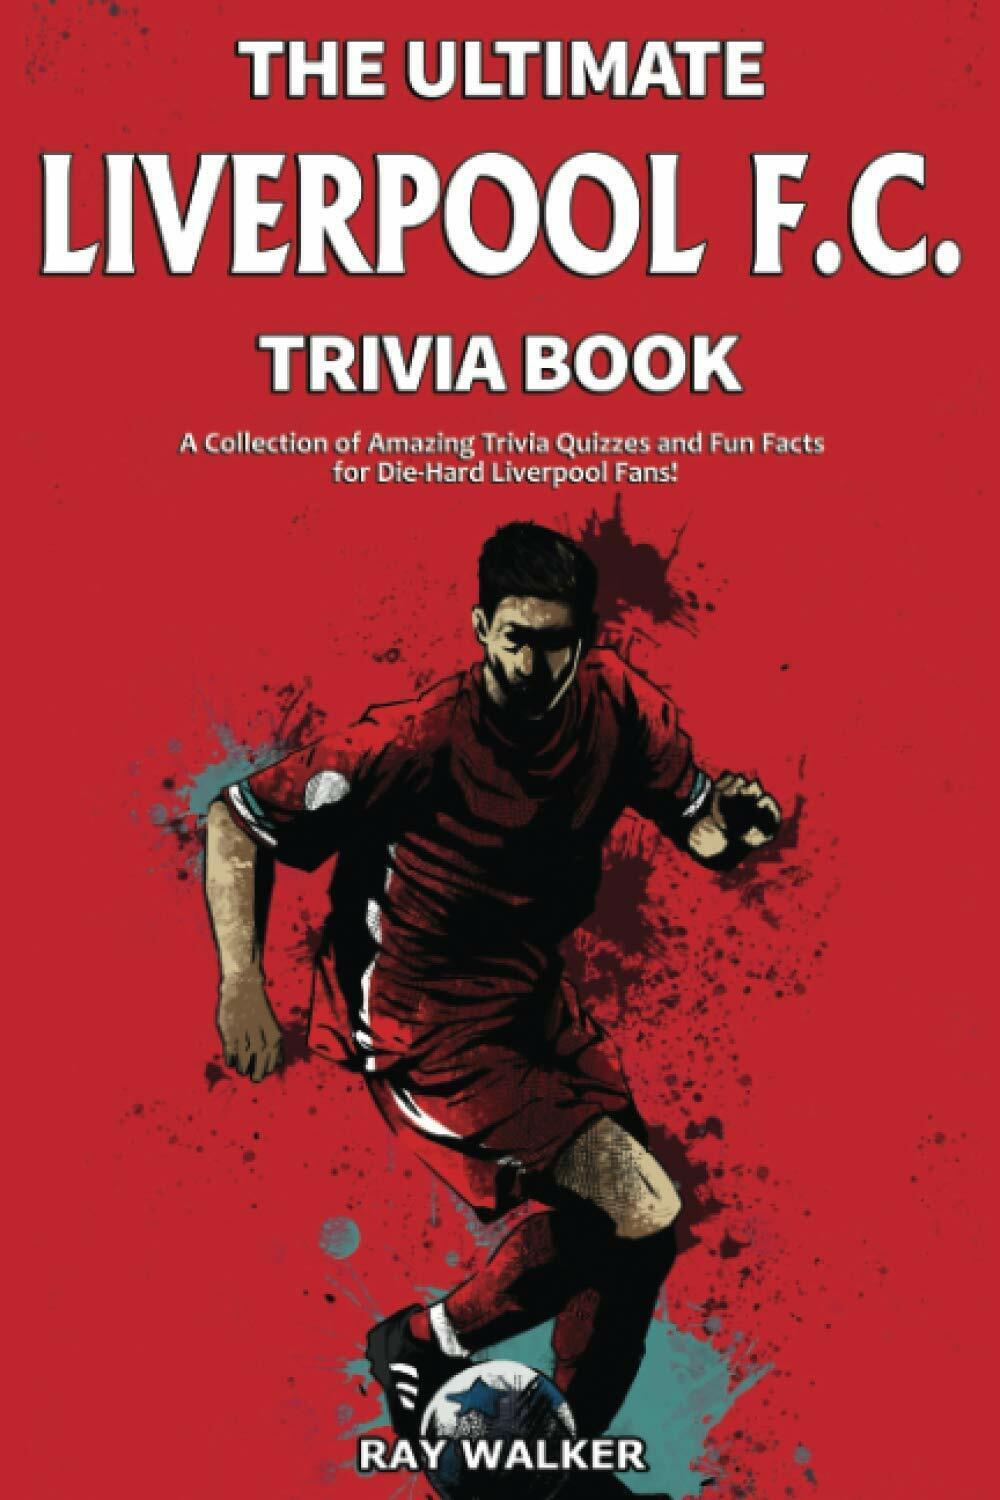 The Ultimate Liverpool F.C. Trivia Book - Ray Walker - HRP House, 2020